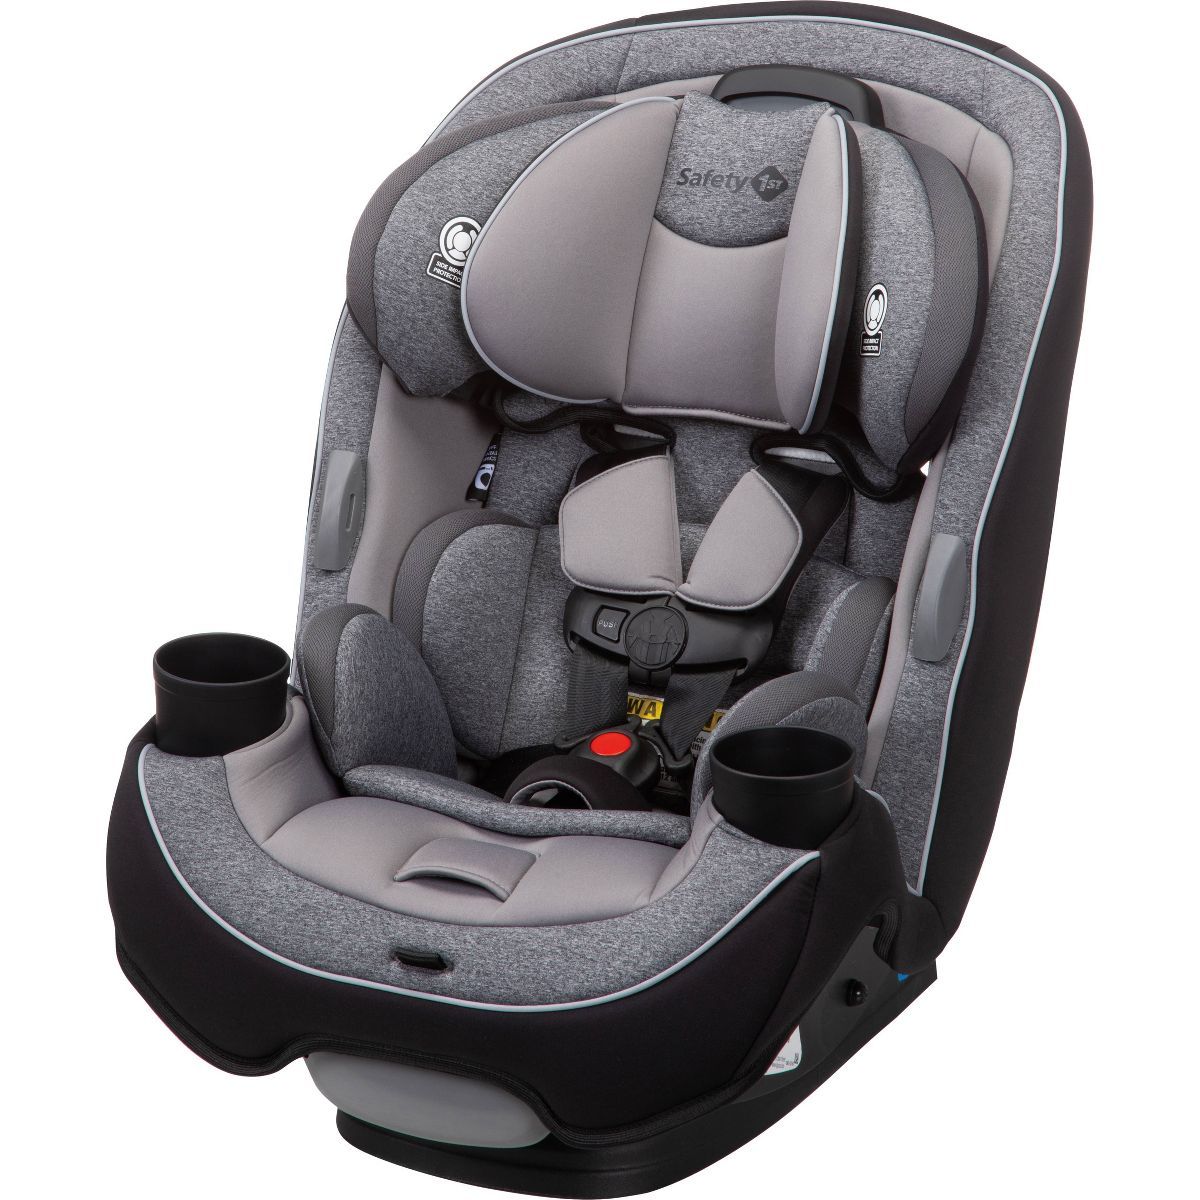 Safety 1st Grow and Go All-in-1 Convertible Car Seat | Target